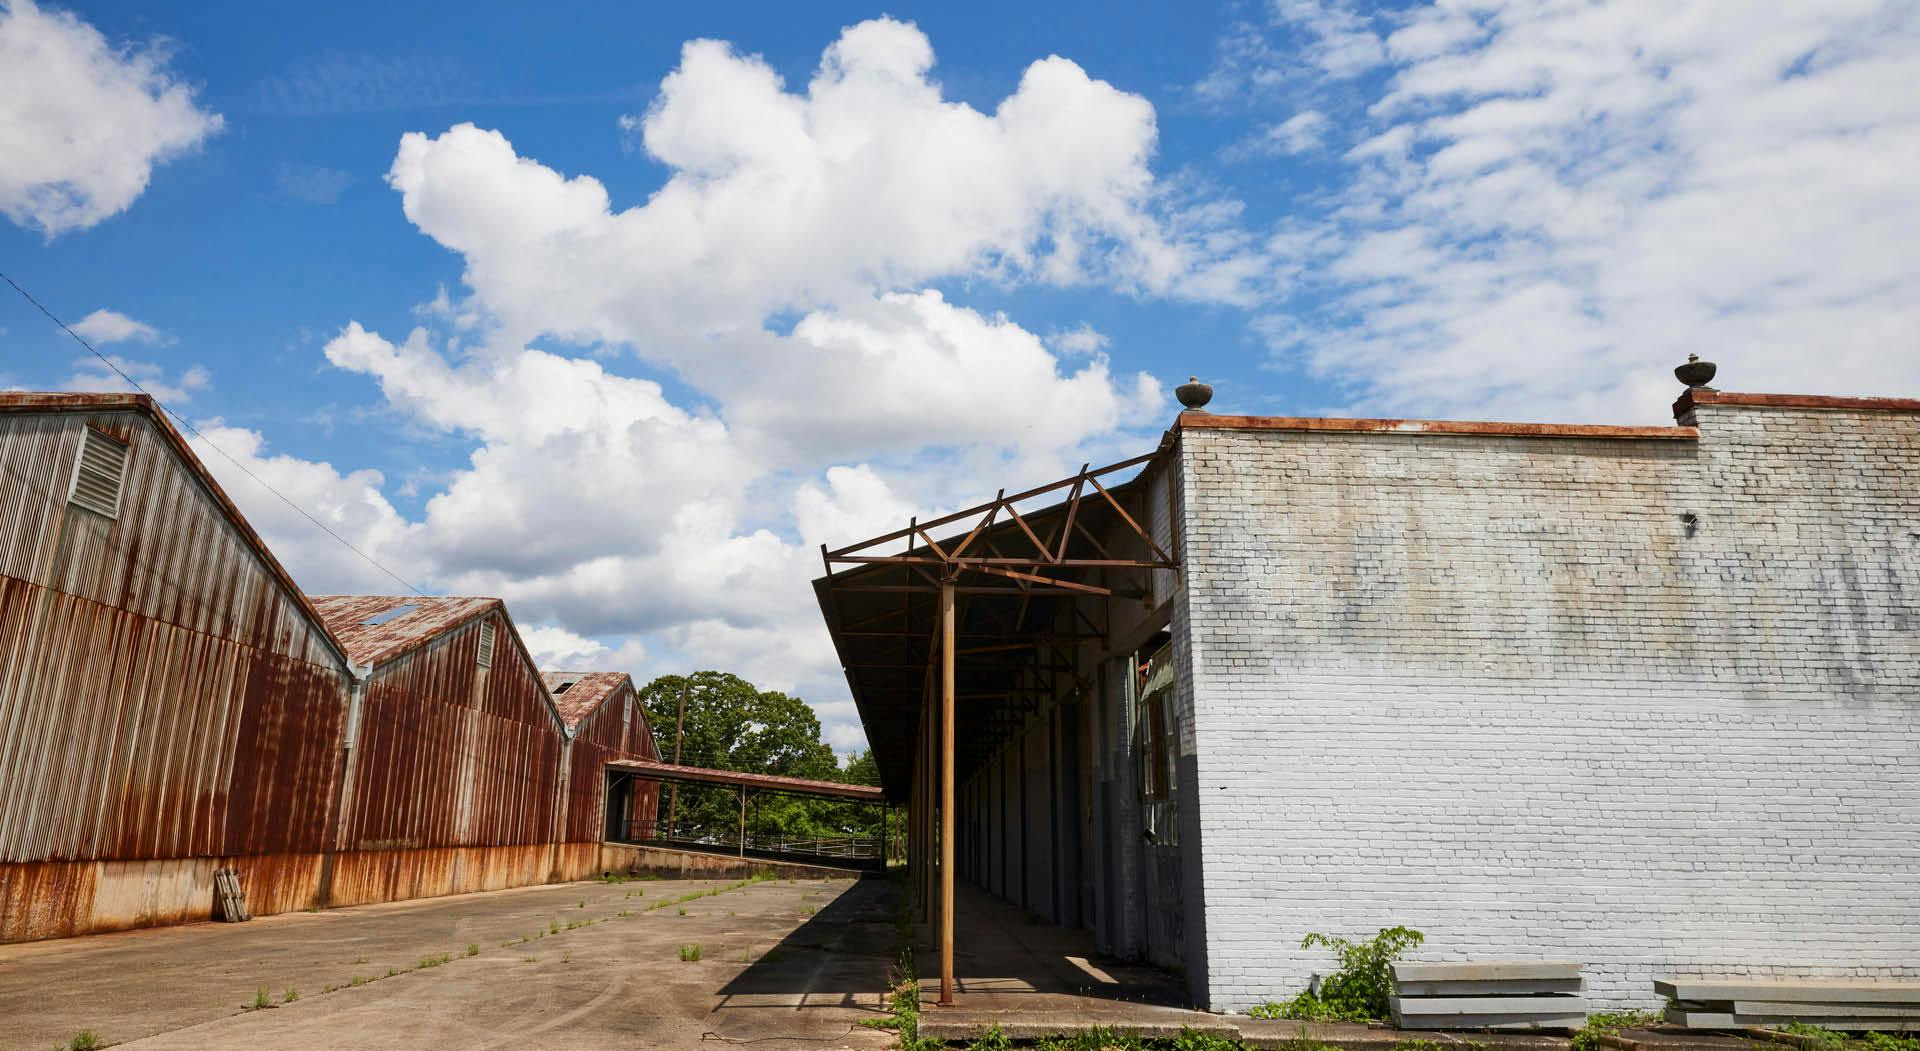 Warehouses dot the Murphy Crossing site owned by Atlanta Beltline, Inc. (Photo Credit: Erin Sintos)